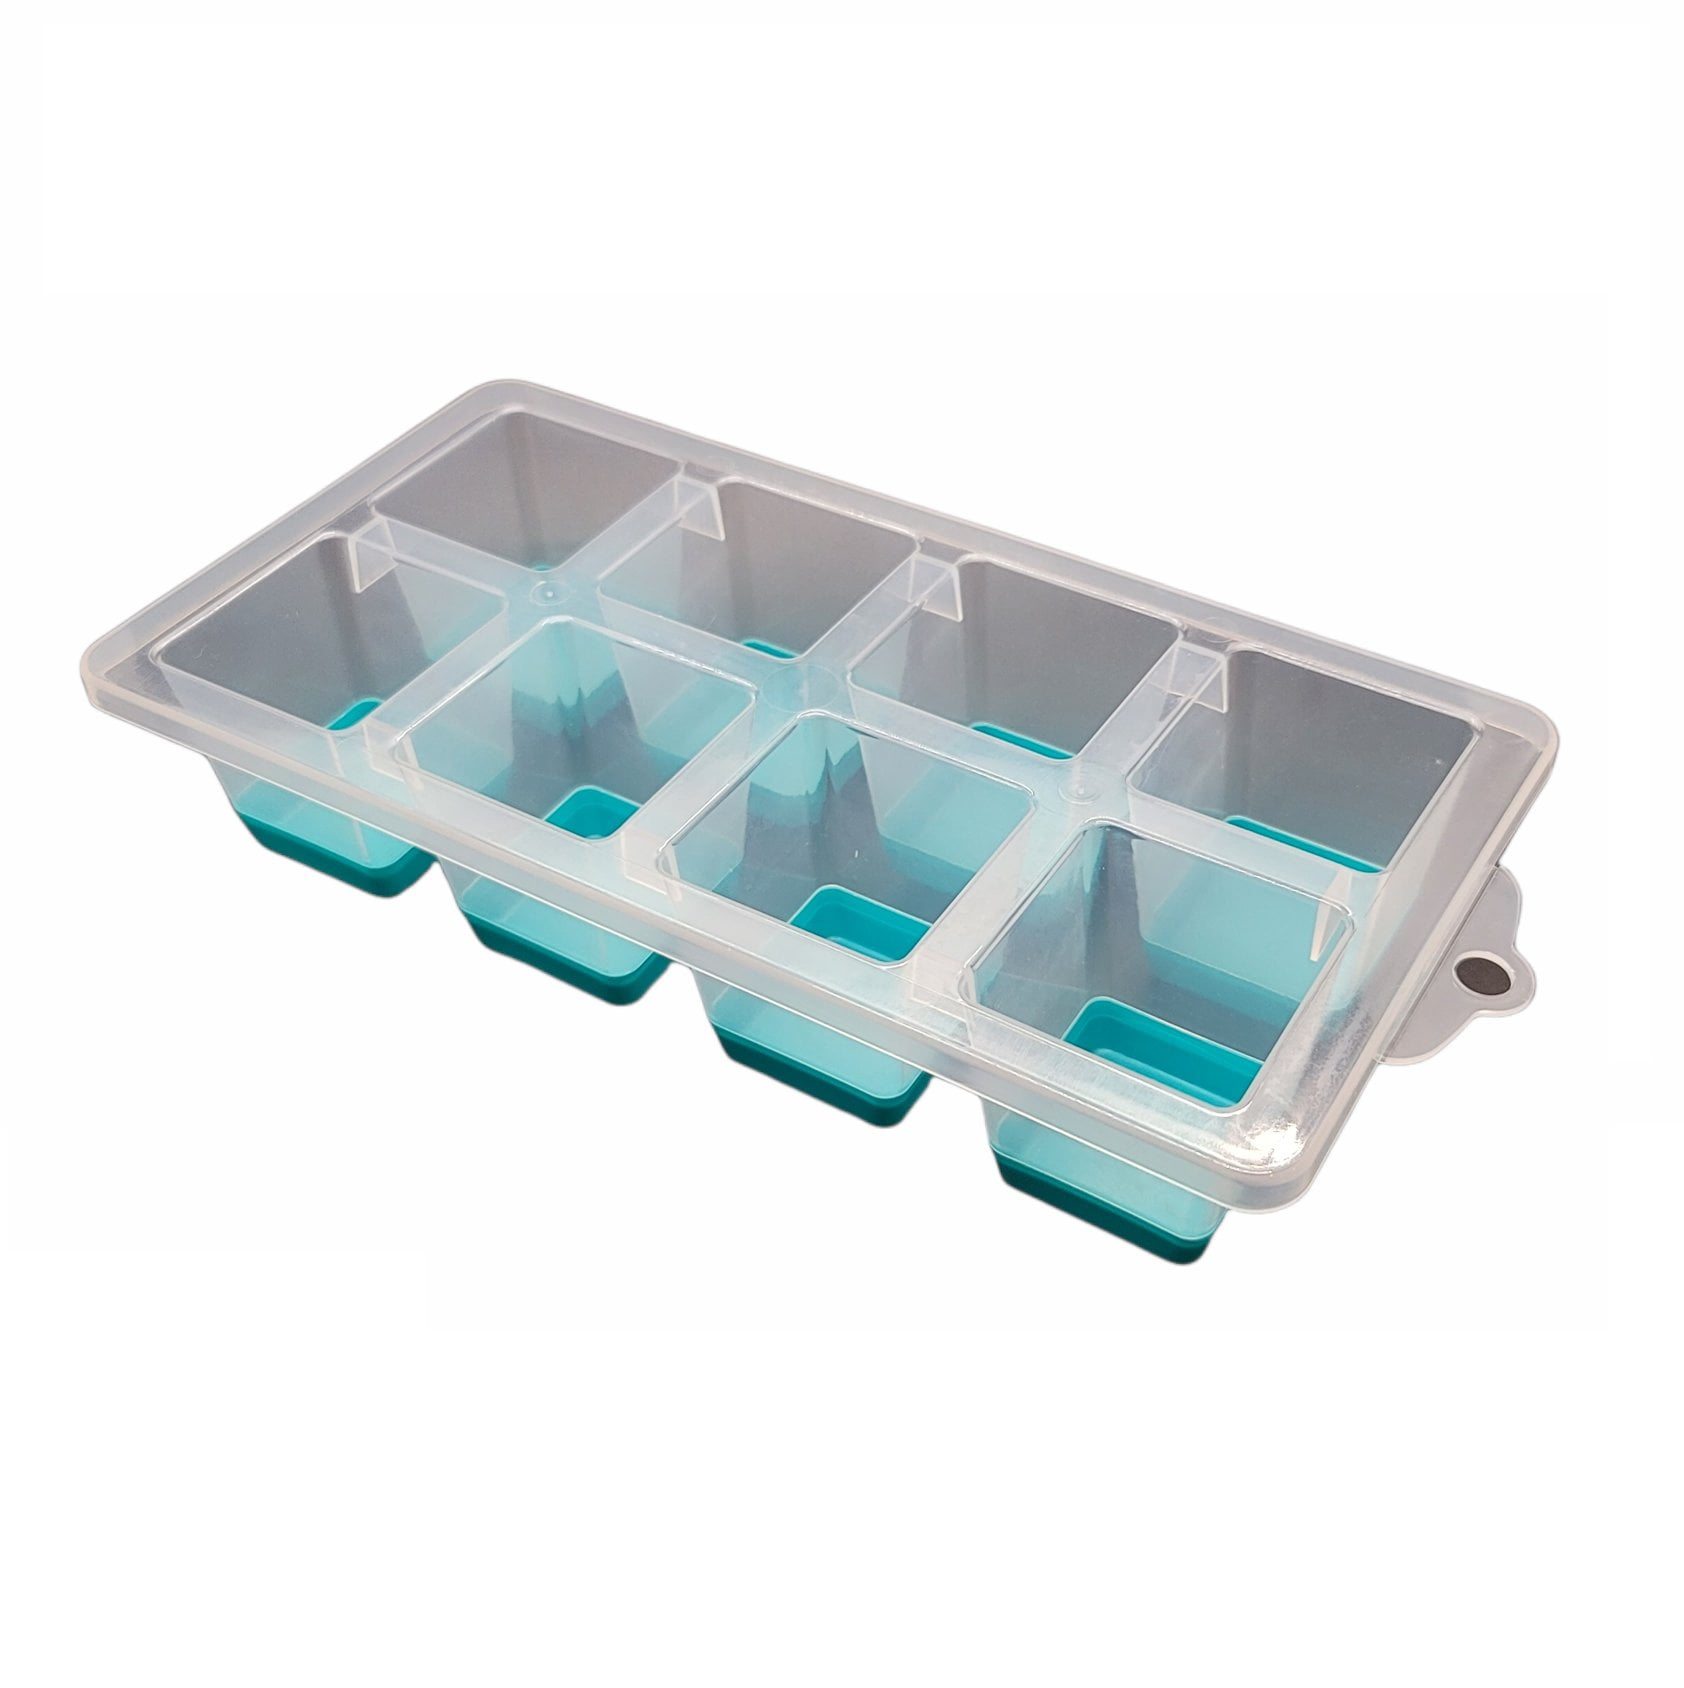 Large Ice Cube Tray Mold 8 Big 2 X 2 Inch Square Ice Cubes Silicon Tray Pack 2" 